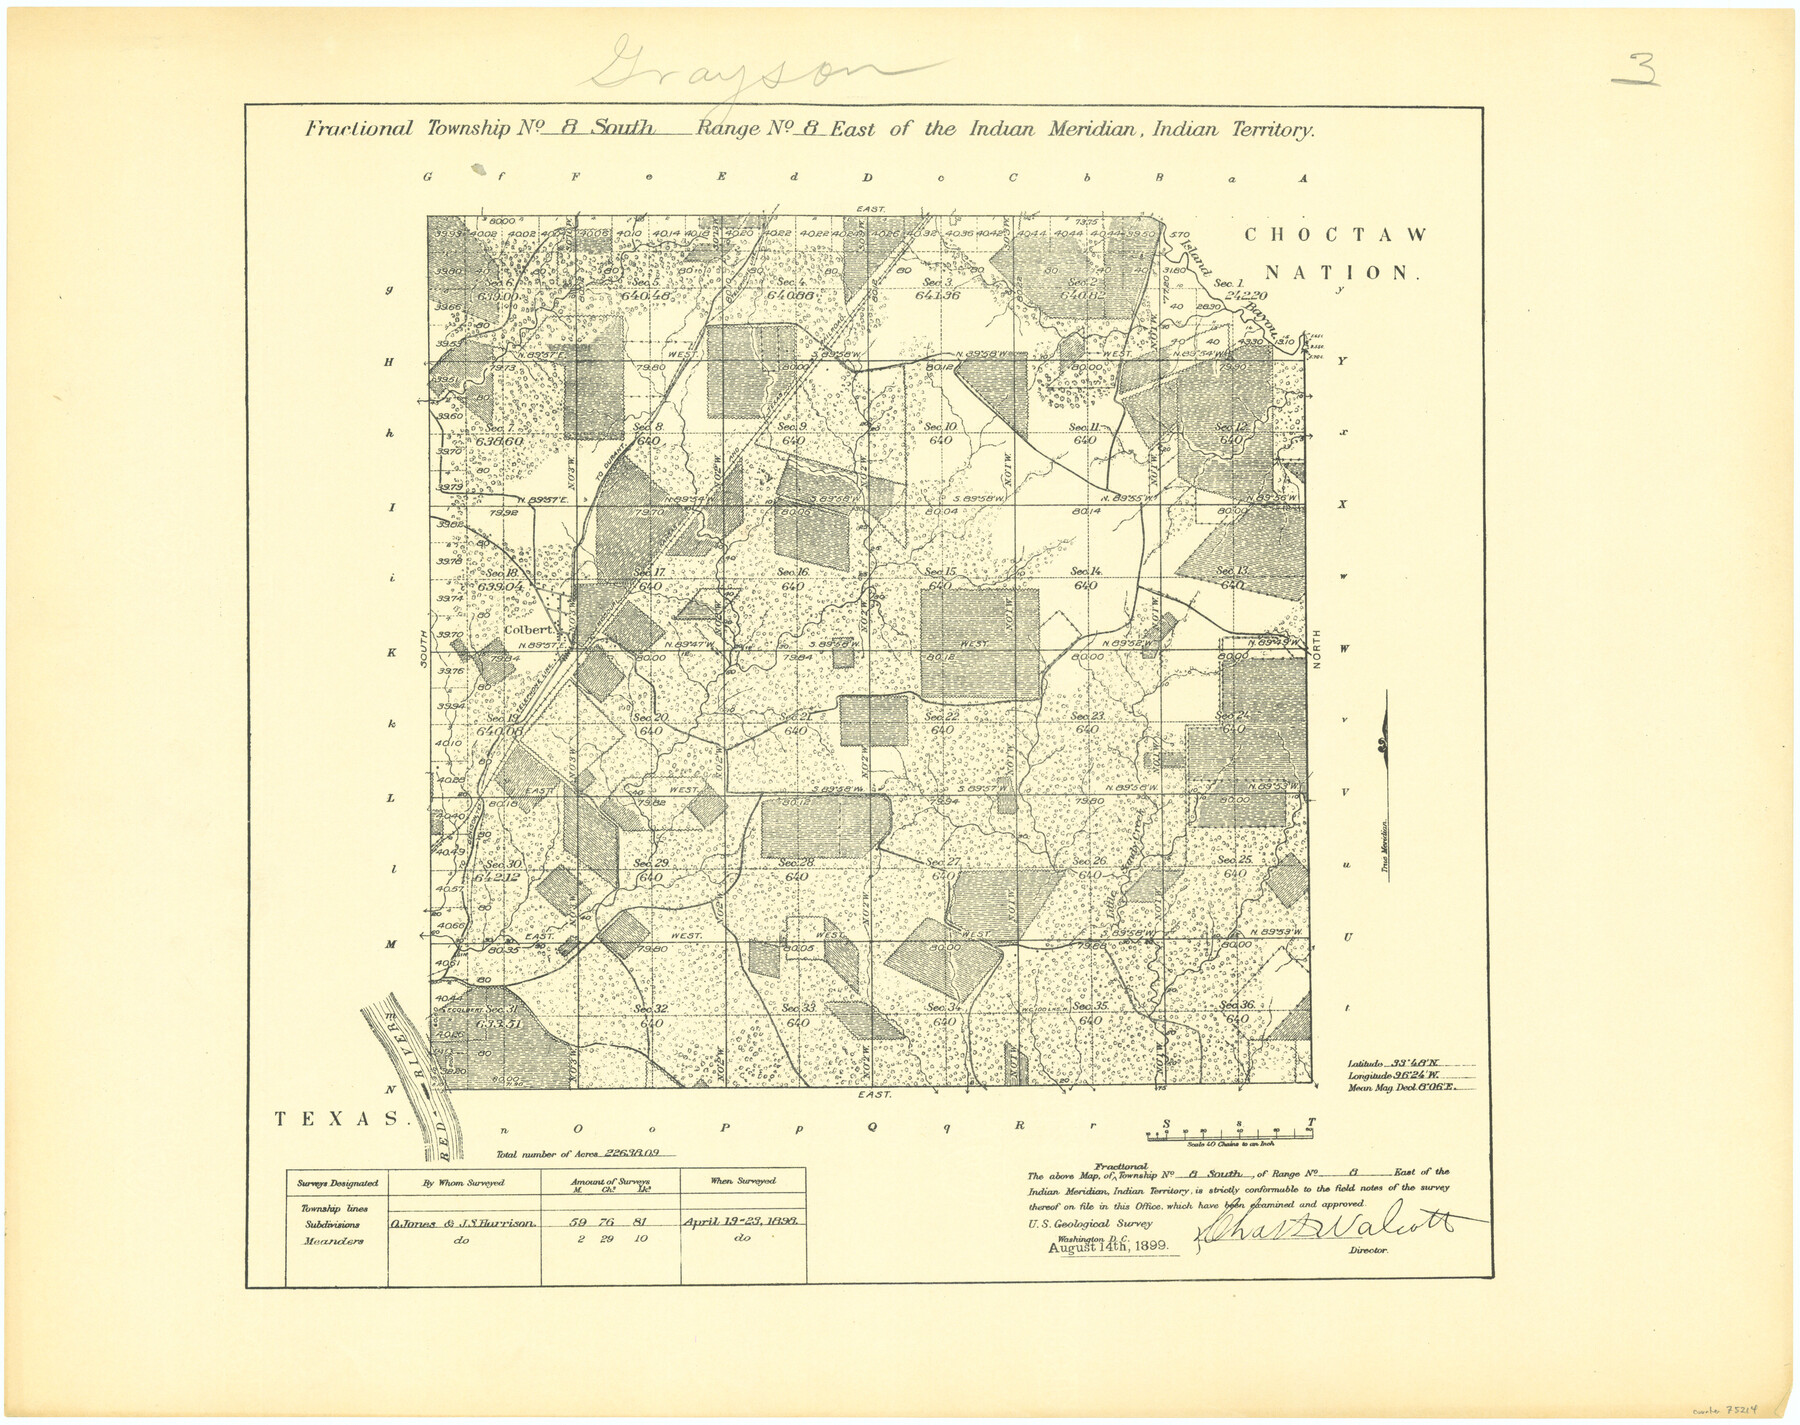 75214, Fractional Township No. 8 South Range No. 8 East of the Indian Meridian, Indian Territory, General Map Collection